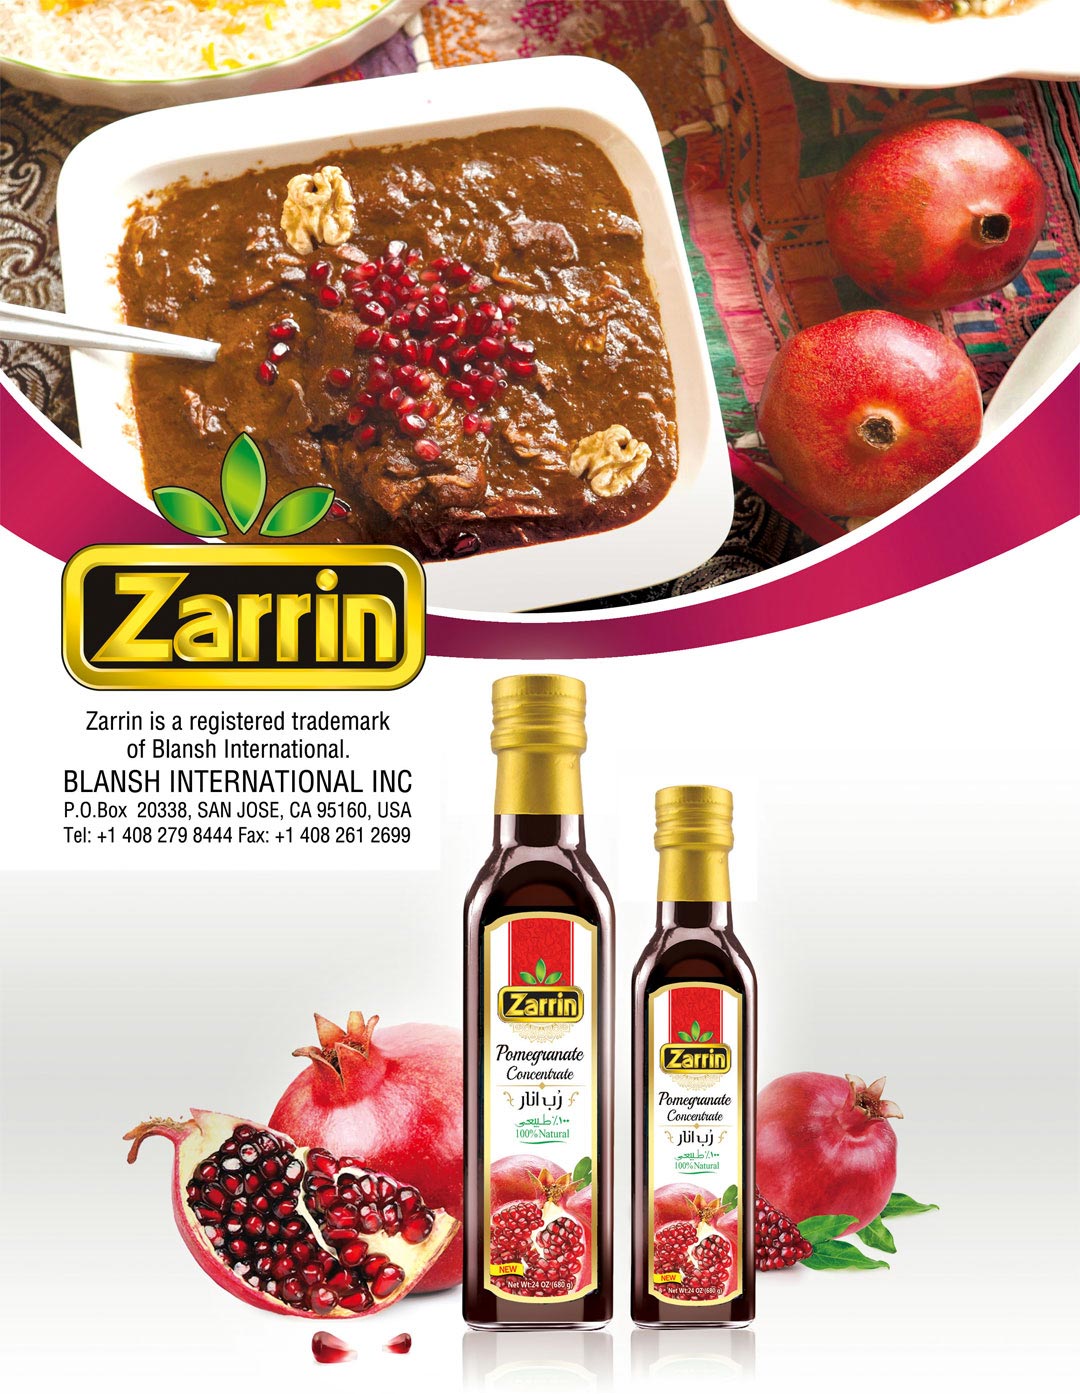 International food imports by Zarrin offering pomegranate food products.